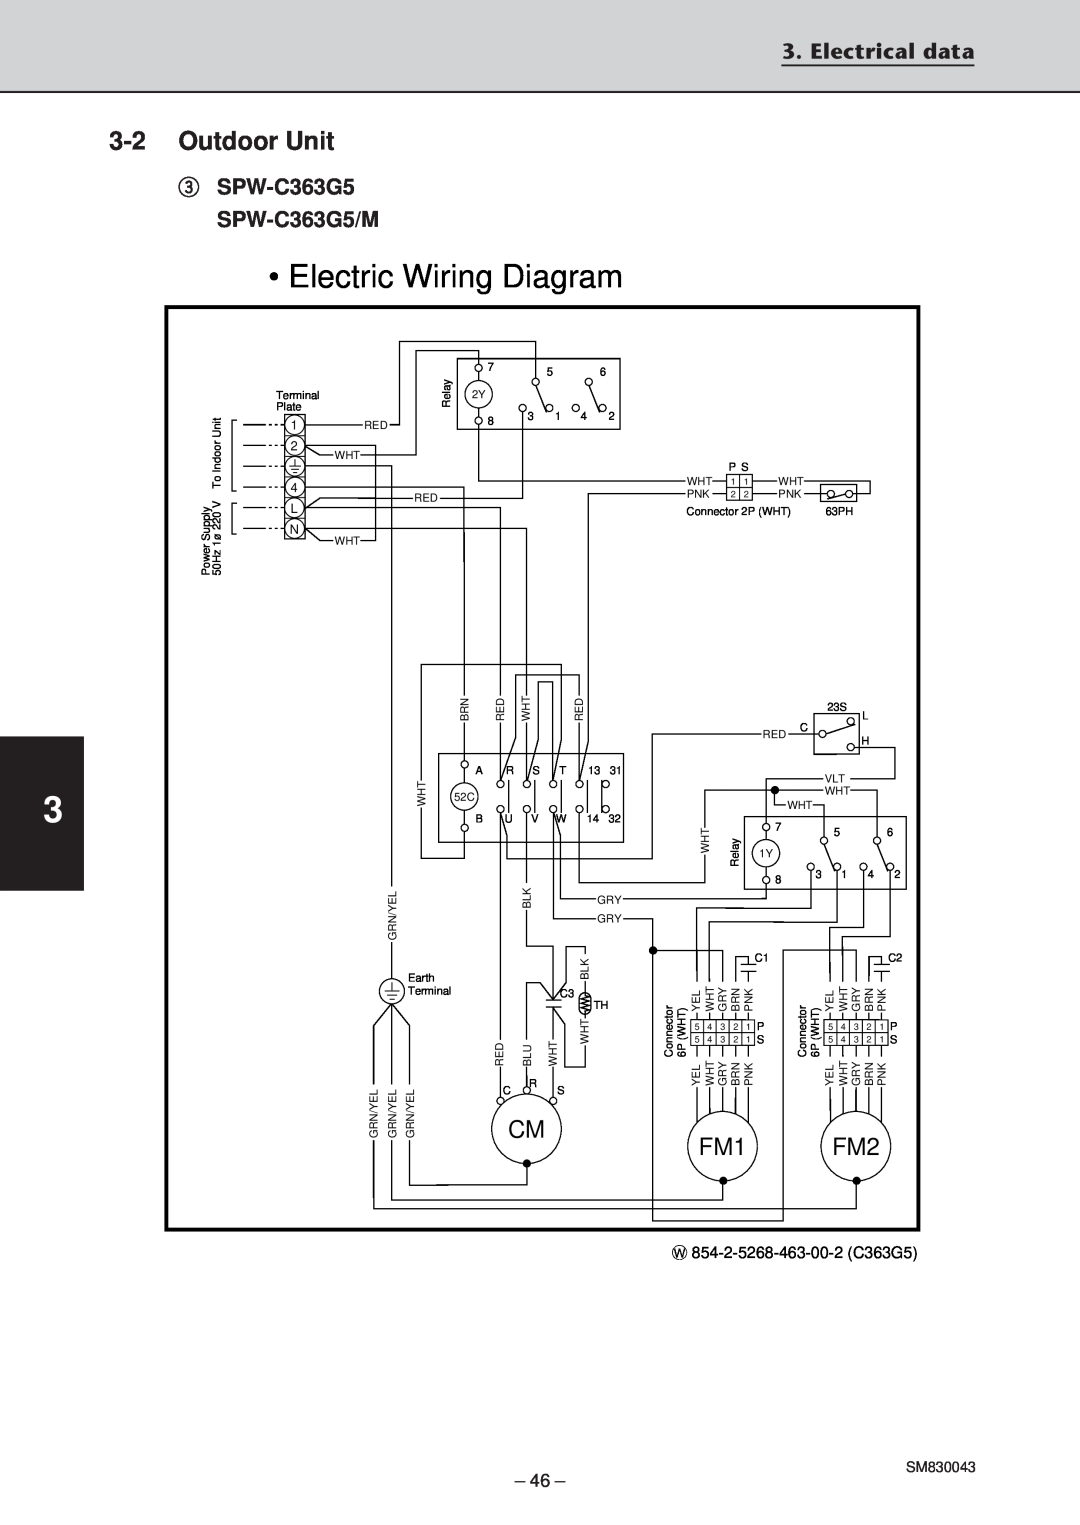 Sanyo SPW-T253GS56 Electric Wiring Diagram, 3-2Outdoor Unit, FM1 FM2, Electrical data, 3SPW-C363G5 SPW-C363G5/M 